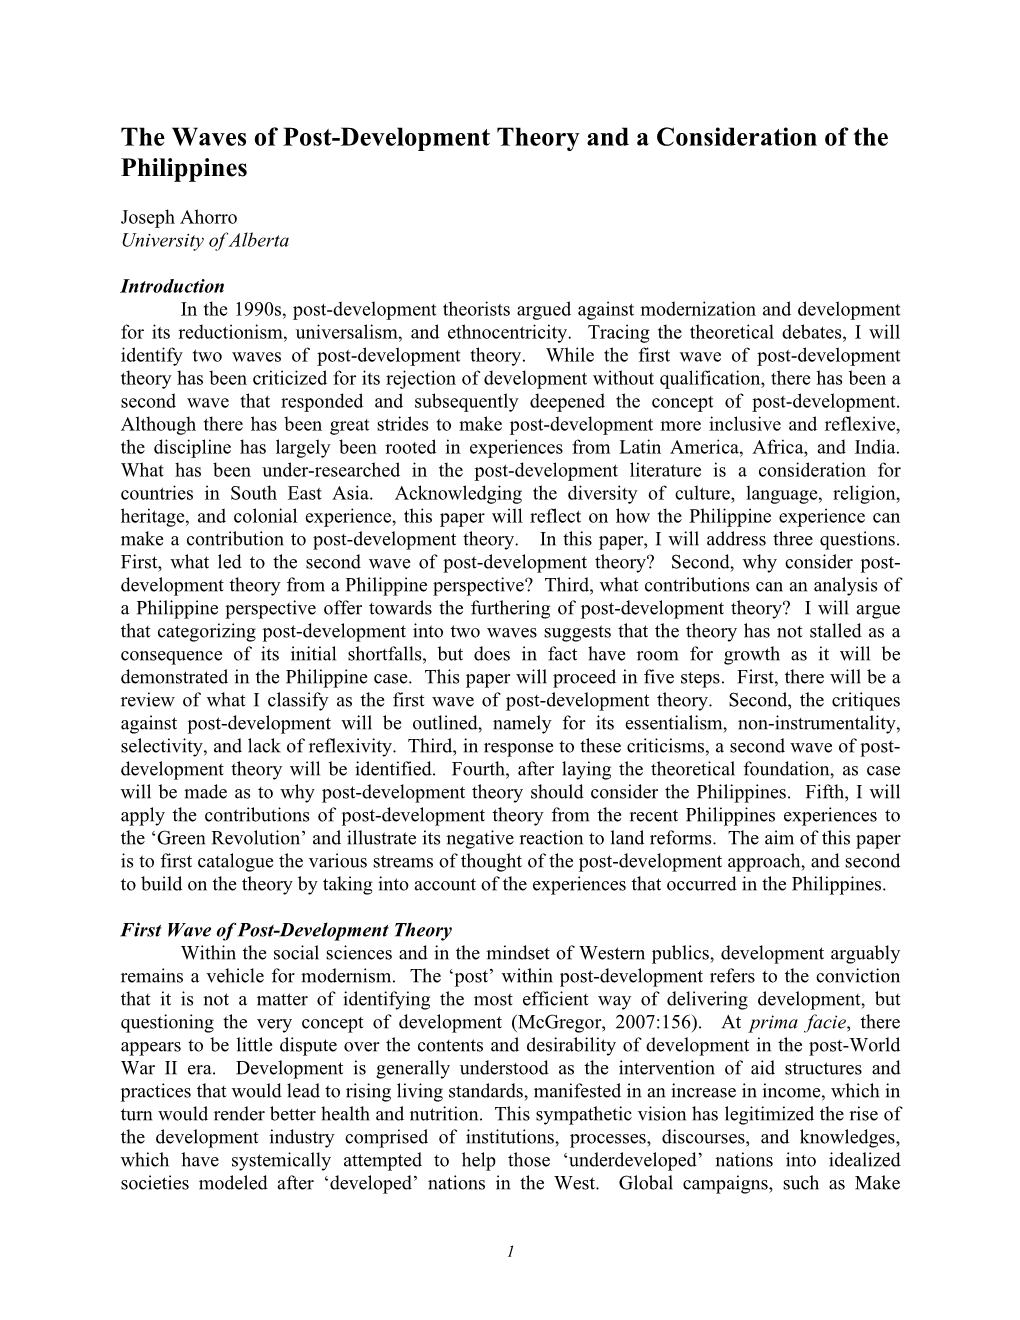 The Waves of Post-Development Theory and a Consideration of the Philippines